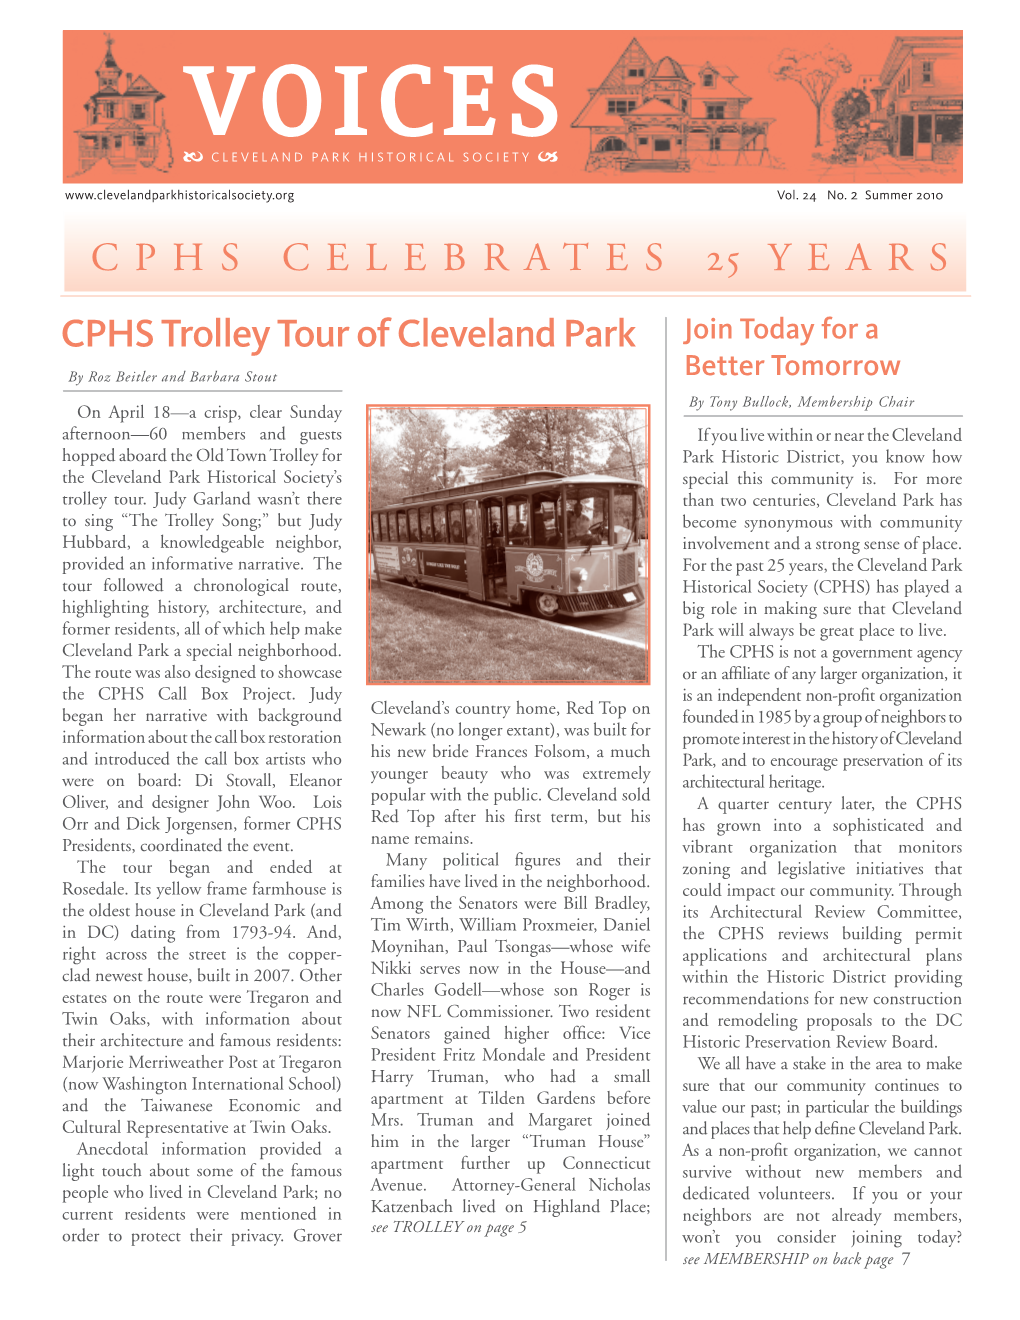 CPHS CELEBRATES 25 YEARS CPHS Trolley Tour of Cleveland Park Join Today for A